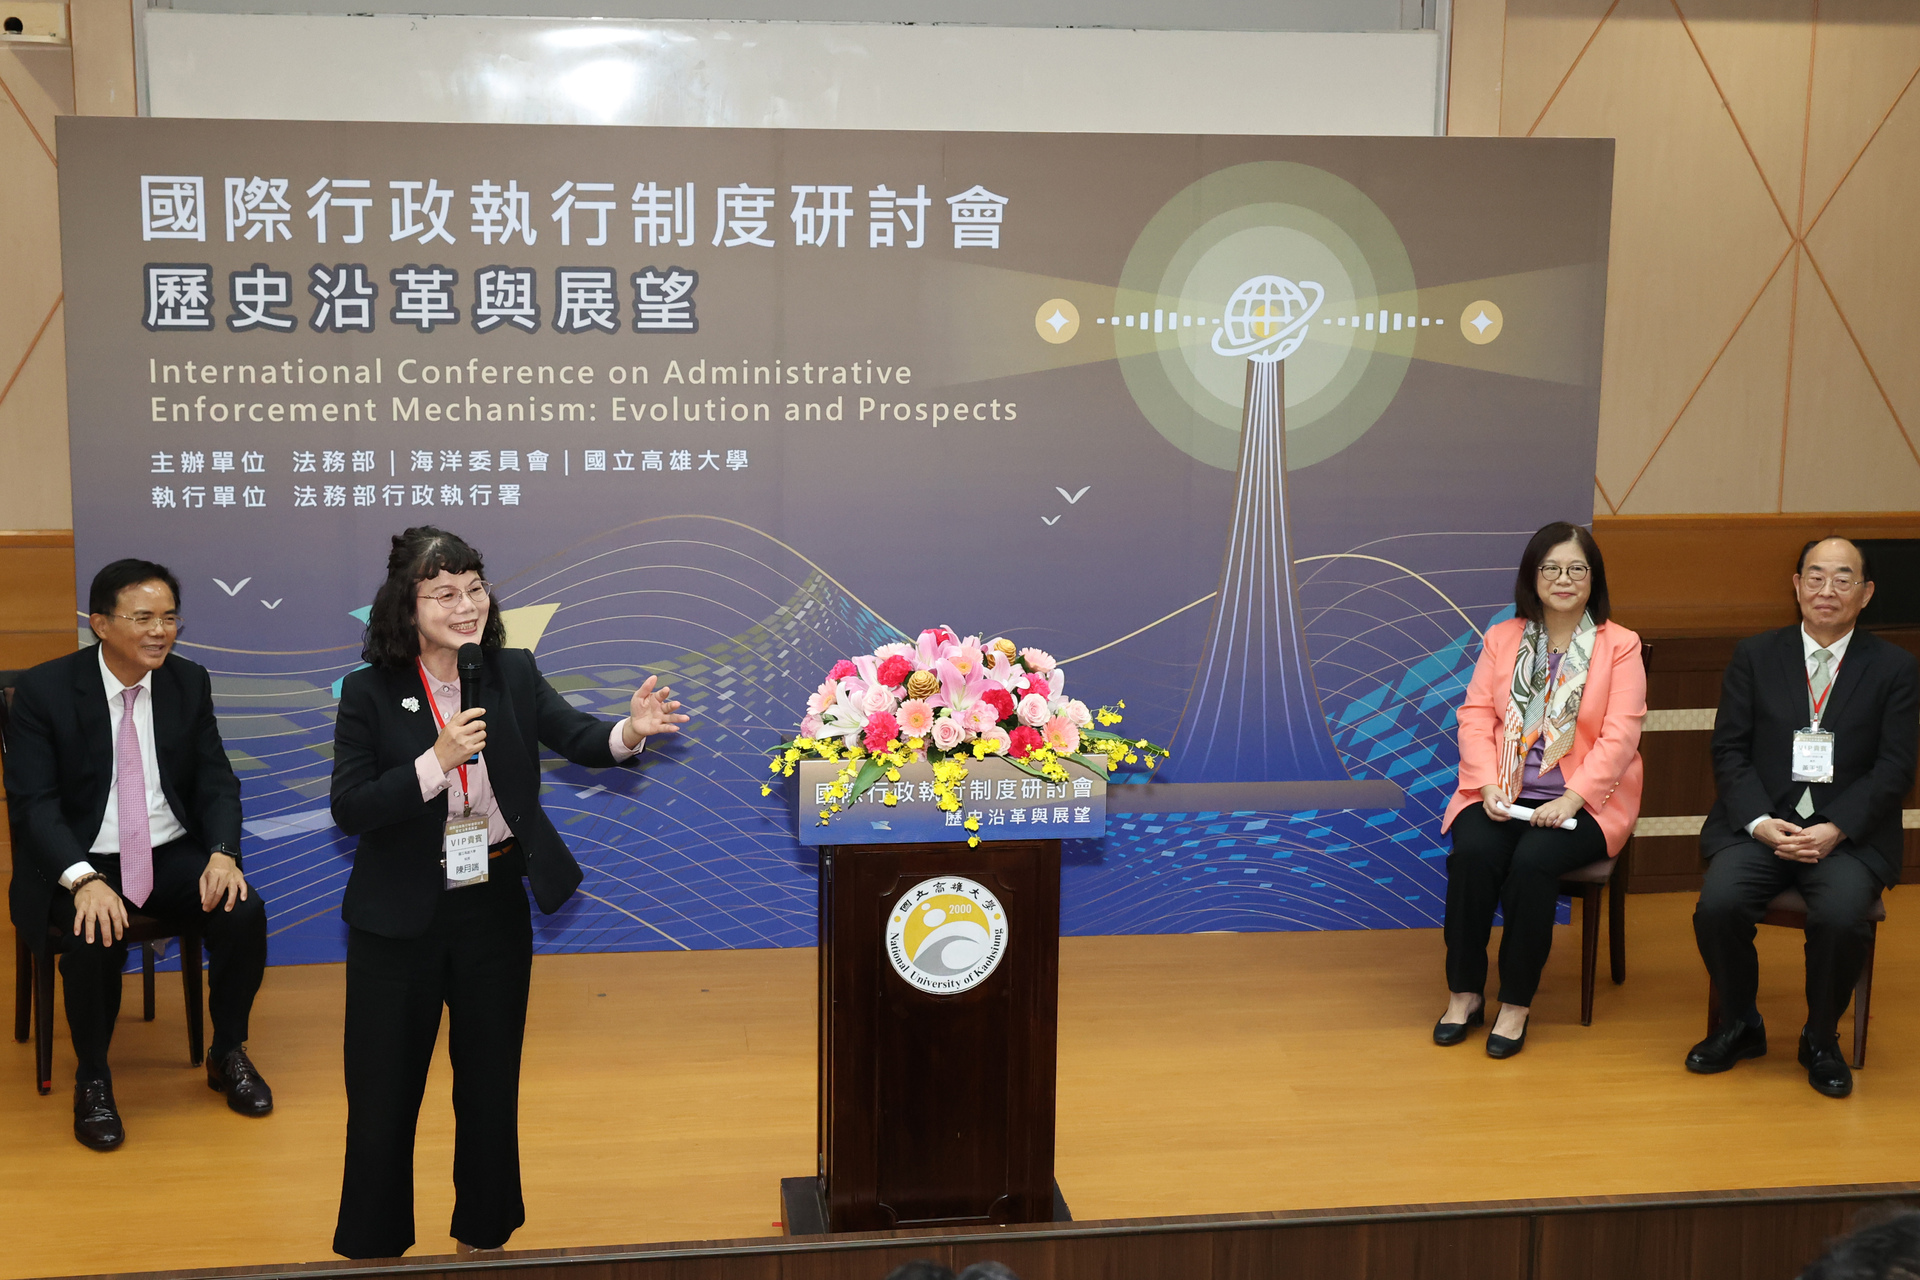 The Ministry of Justice, the Ocean Affairs Council, and the National University of Kaohsiung jointly organized the " International Conference on Administrative Enforcement Mechanism: Evolution and Prospects.” The President of the NUK, Yueh-Tuan Chen, (standing second from the left) extends greetings and welcomes as the host.